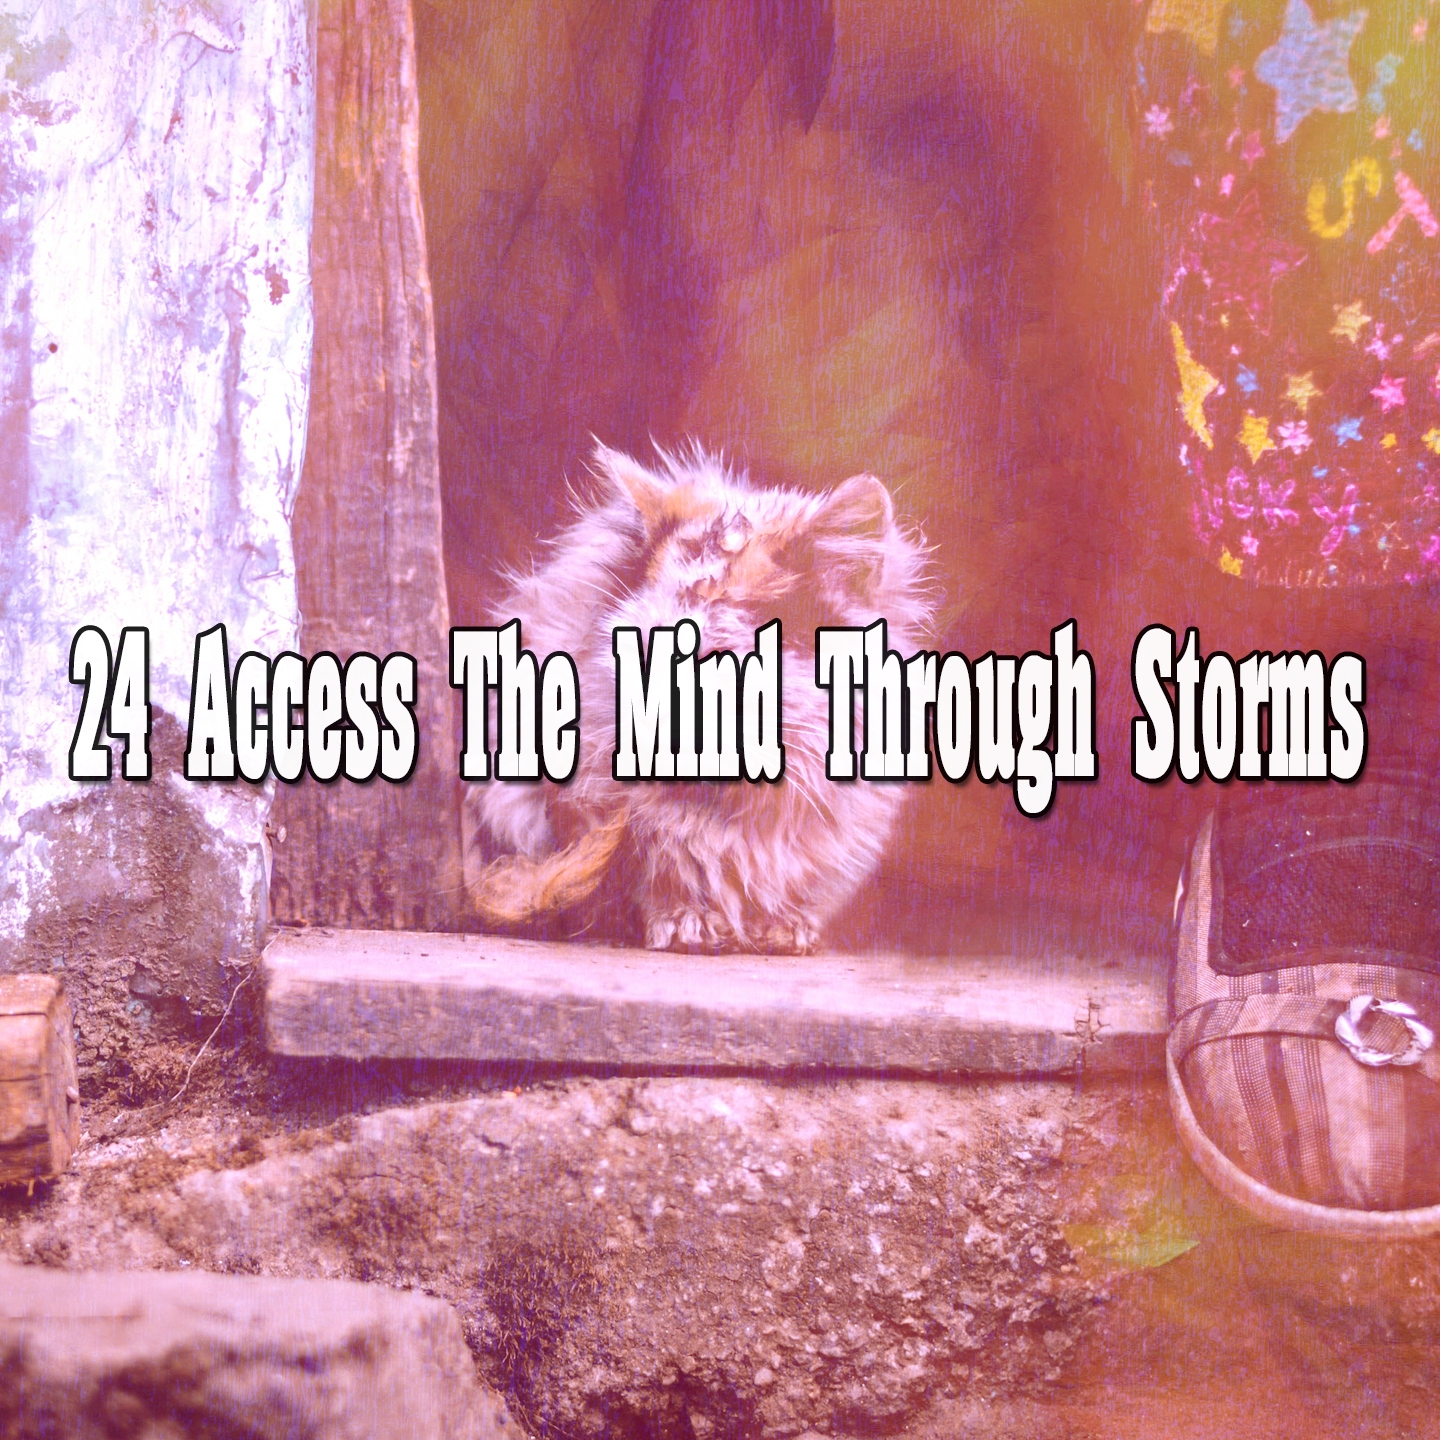 24 Access the Mind Through Storms